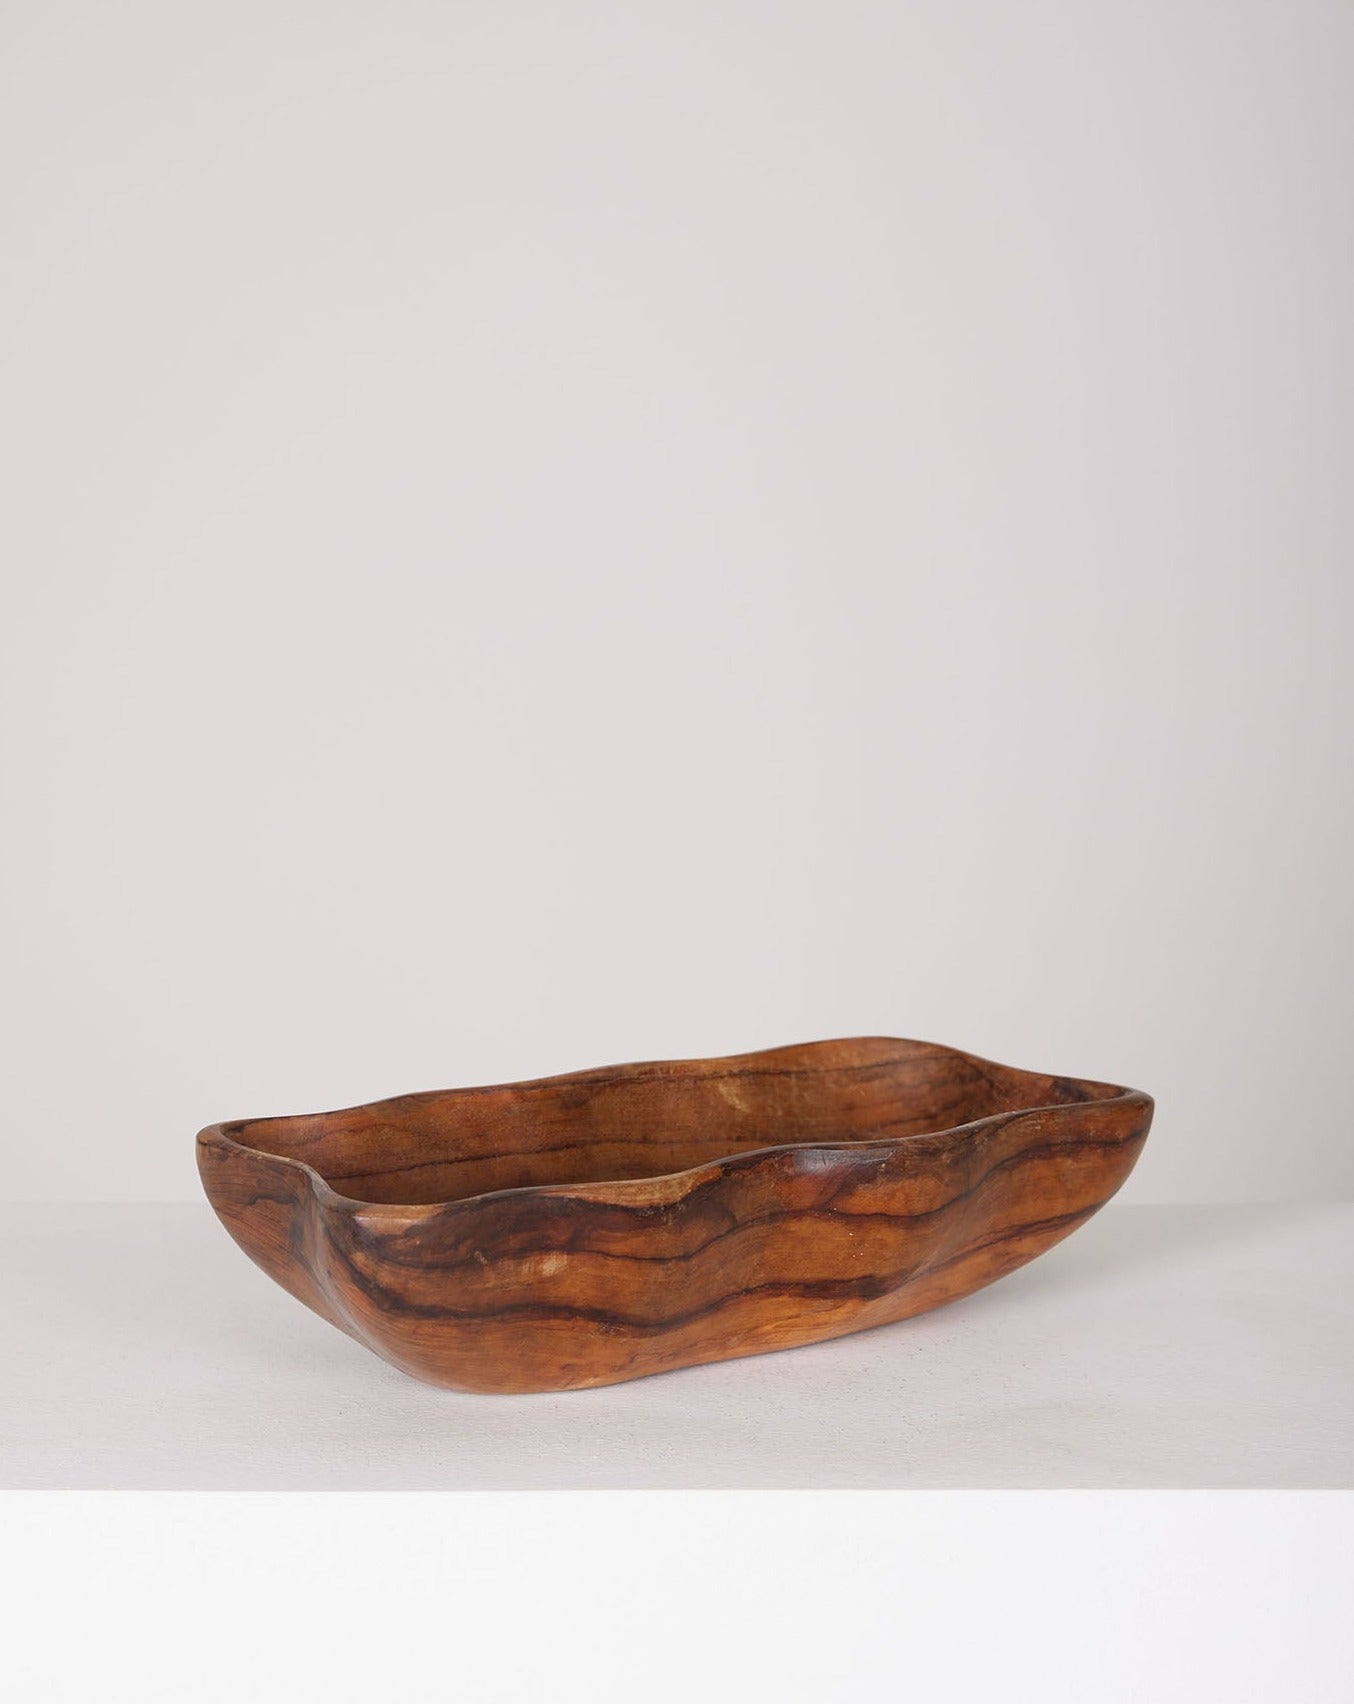 Olive wood cup